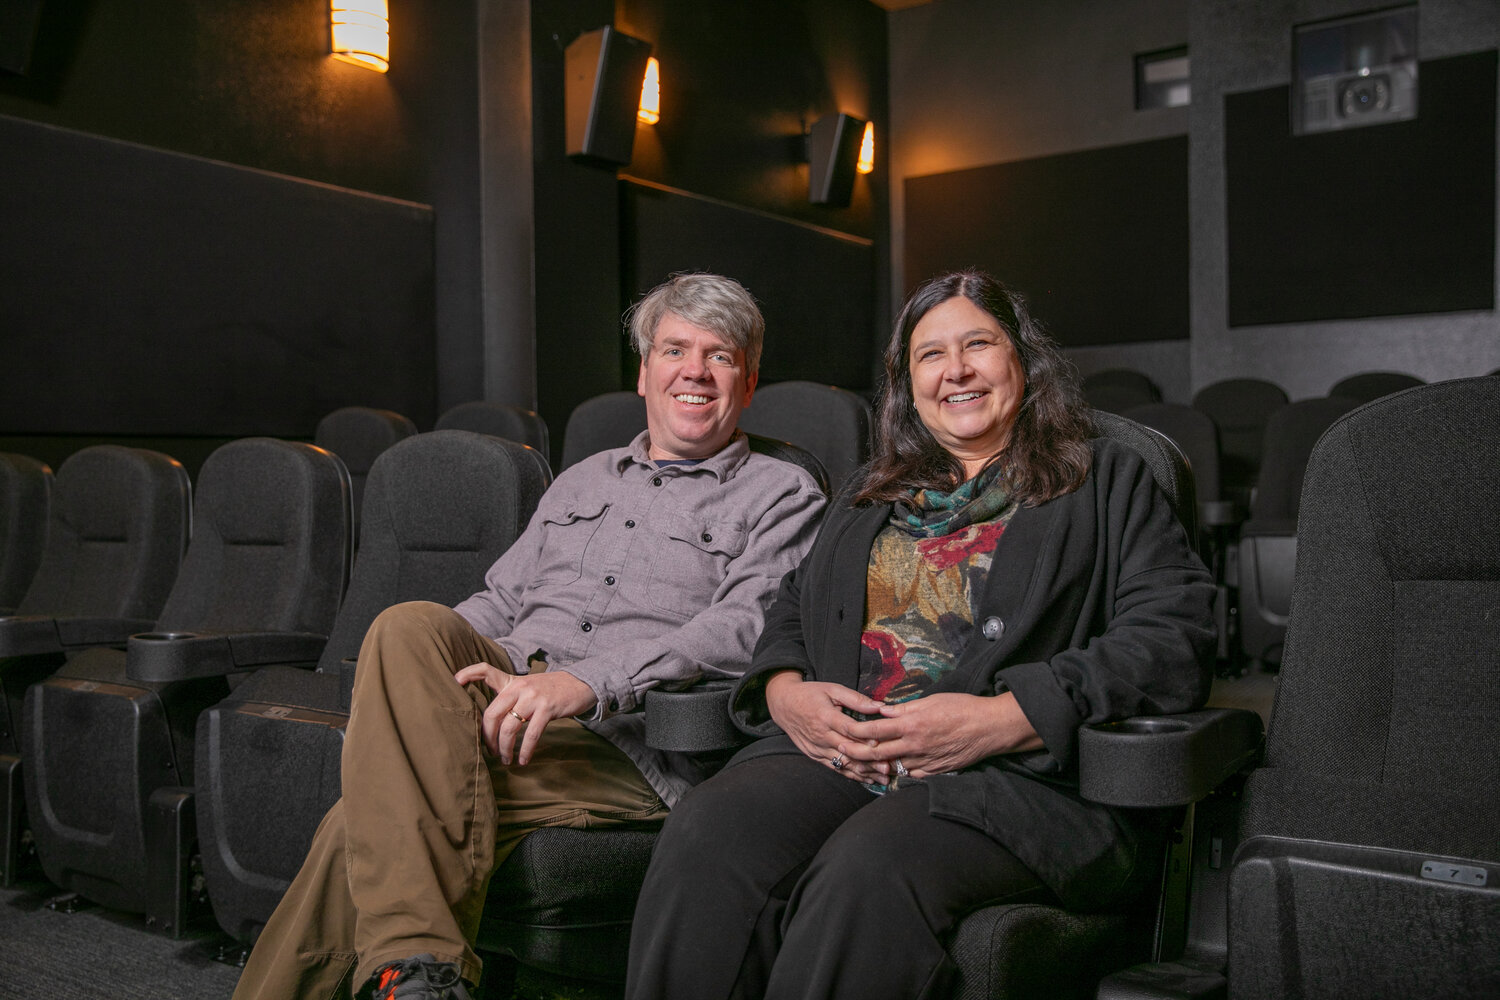 MOXIE MOVEMENT: Moxie Cinema's board of directors, led by President Stephanie Stenger, right, is seeking a new executive director for the nonprofit art house theater as current leader Mike Stevens plans to depart this spring.